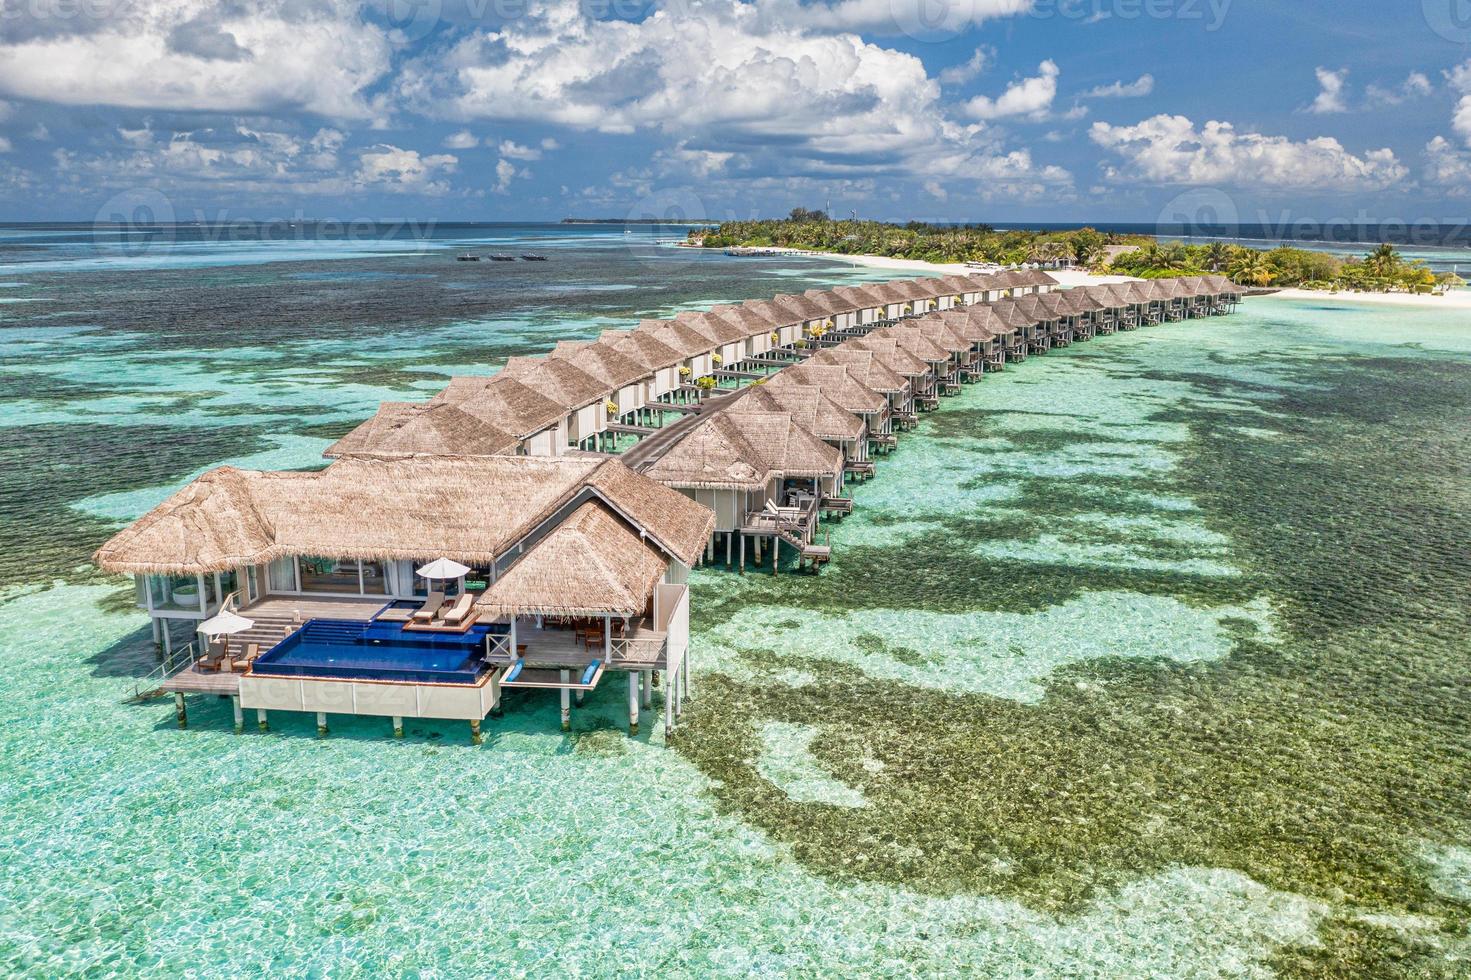 Aerial view of Maldives island, luxury water villas resort and wooden pier. Beautiful sky and ocean lagoon beach background. Summer vacation holiday and travel concept. Paradise aerial landscape pano photo